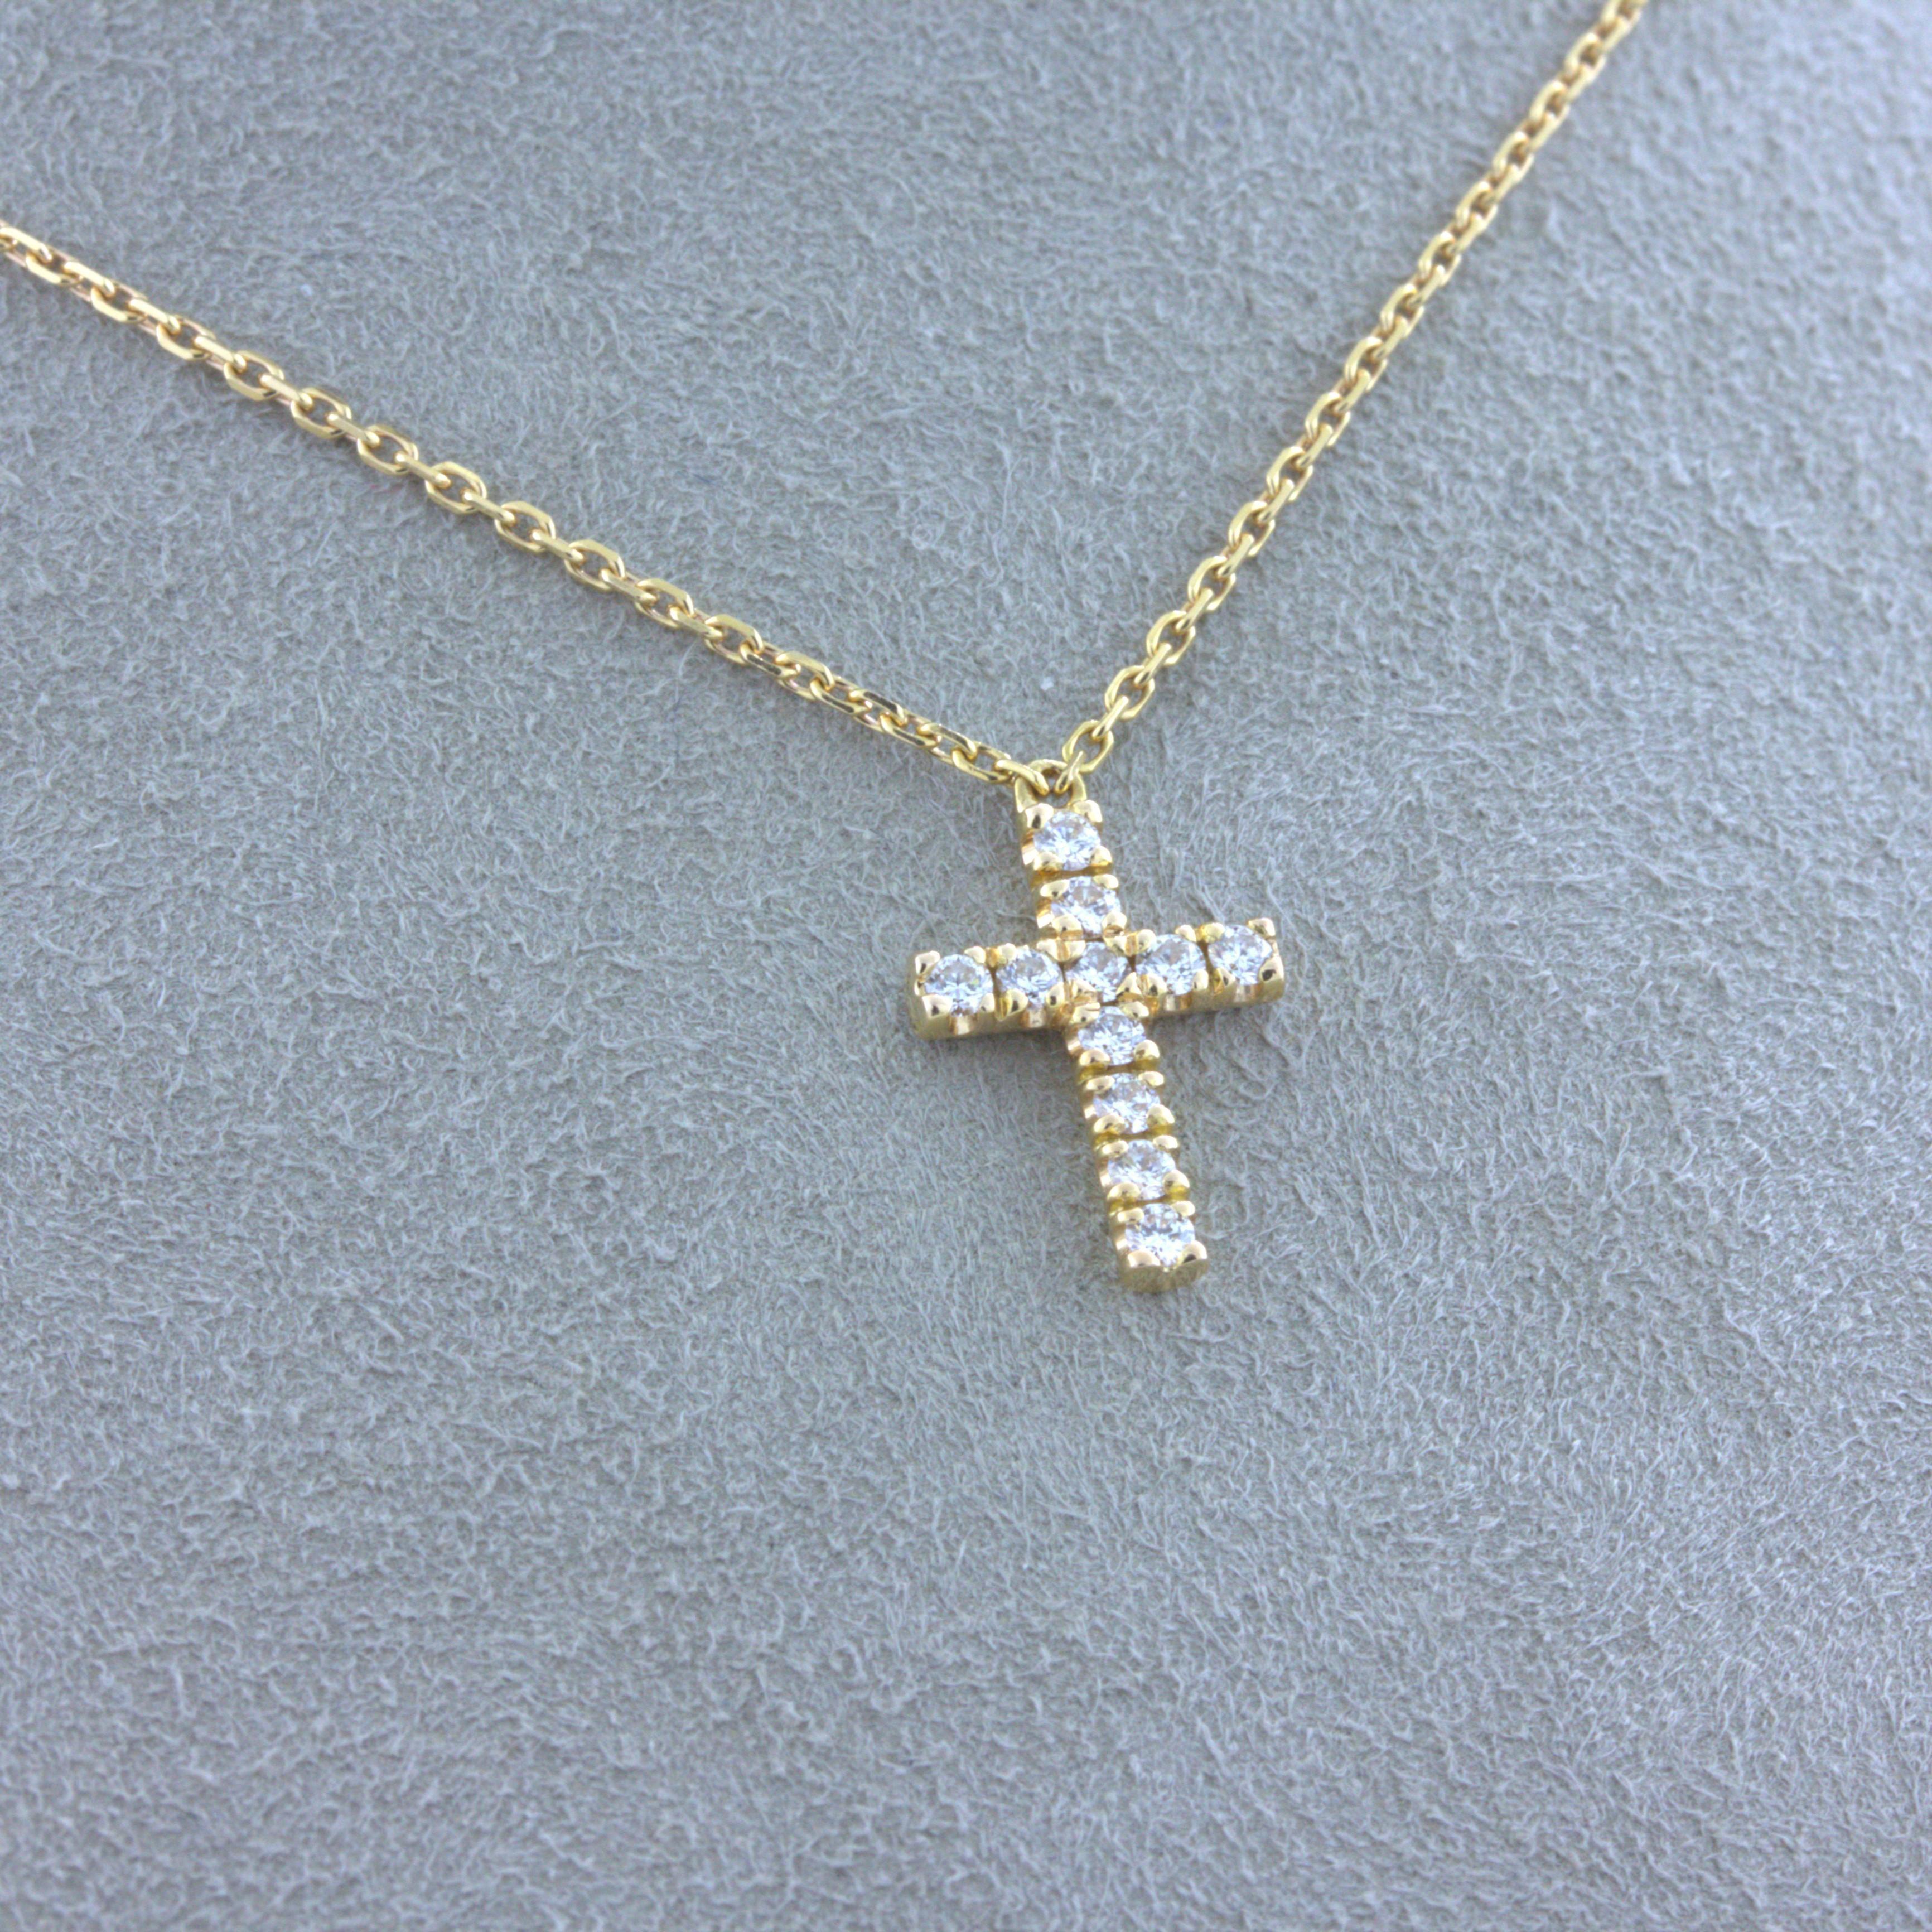 A simple yet fine and elegant cross necklace by Cartier. It features 11 round brilliant-cut diamonds set over the cross which sparkles as it moves in the light. Made in 18k rosy-yellow gold with a cartier double-C charm on the lobster clasp. A